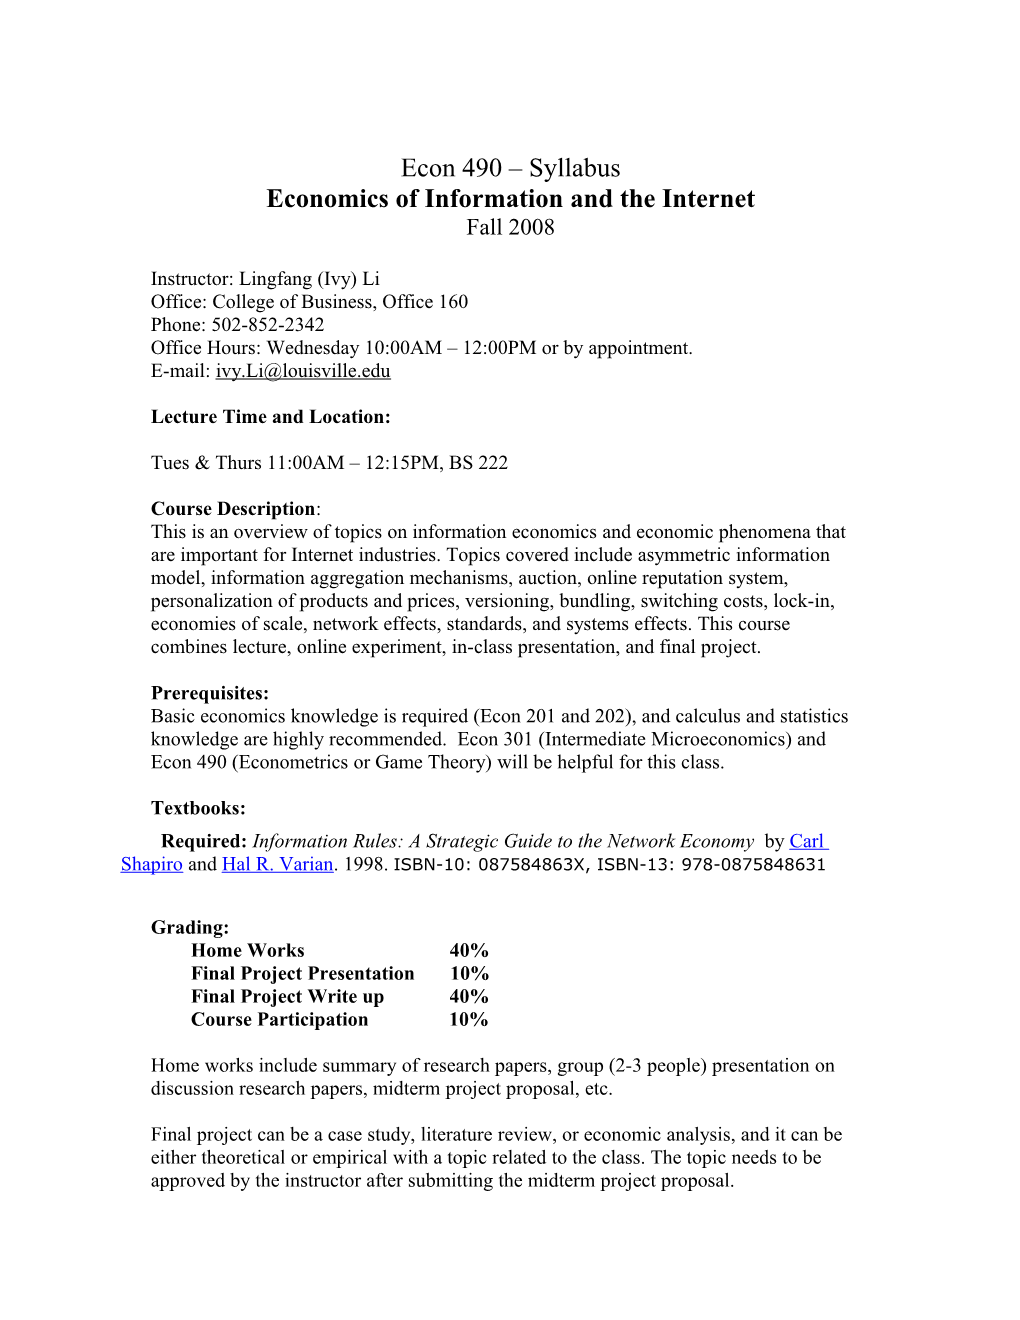 Economics of Information and the Internet